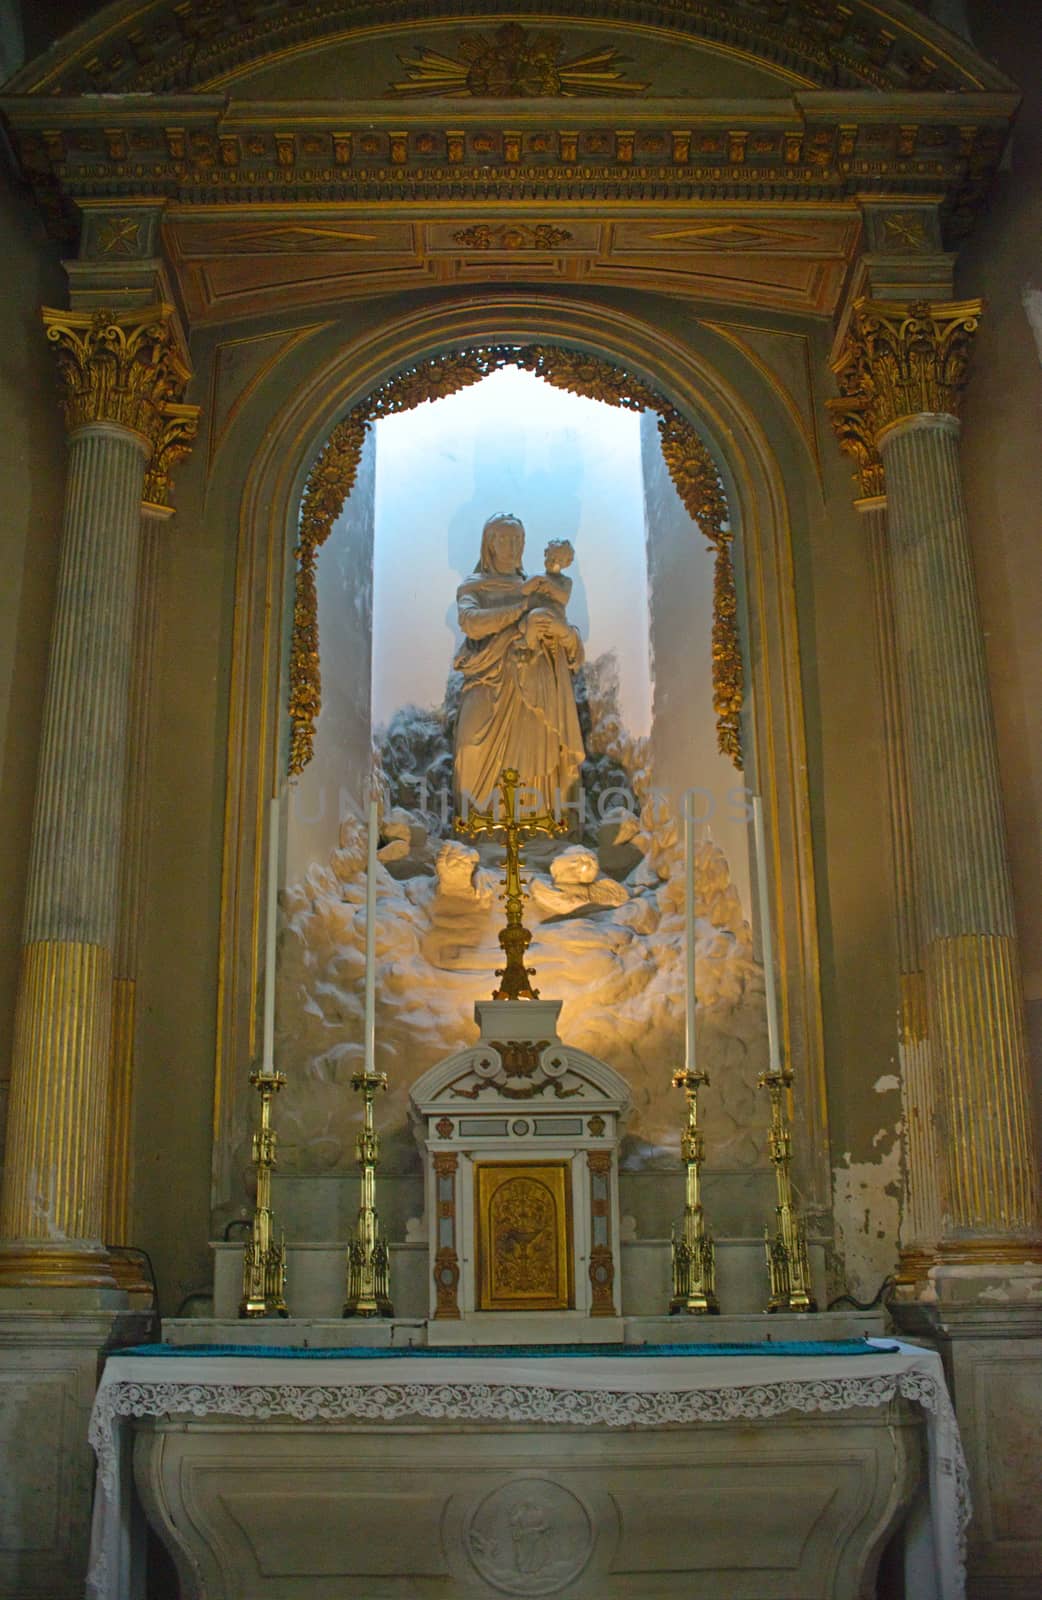 Altar with virgin Mary at Catholic cathedral in Avranches, France by sheriffkule